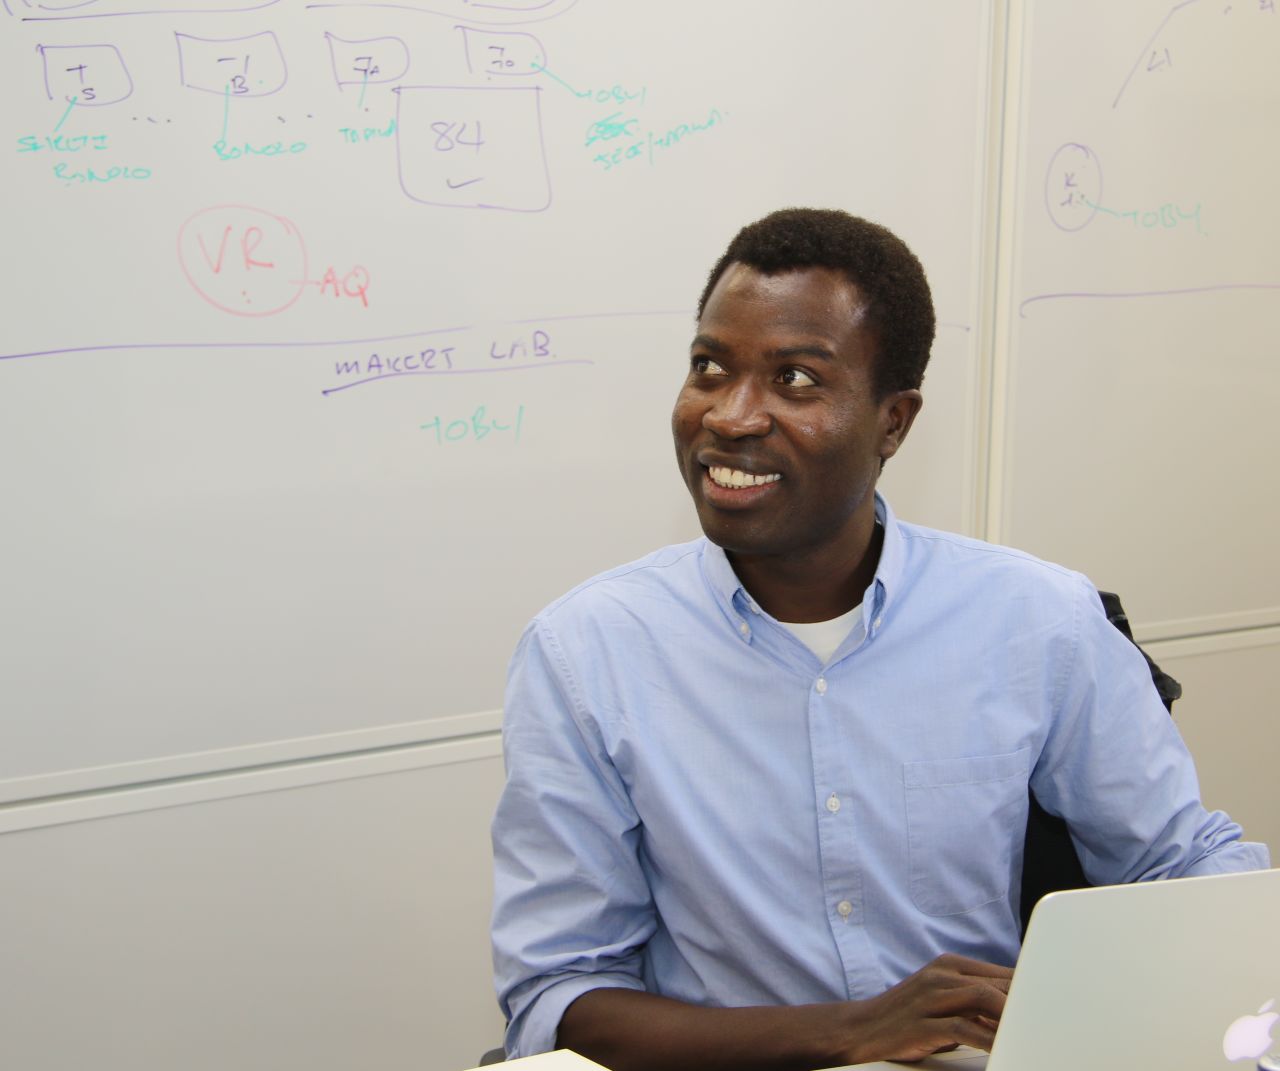 Reliable and up-to-date information on new occurrences of cancer within Africa is notoriously difficult to collect. The team wants to work towards faster data collection within South Africa and more widely across the African continent. "By tracking data digitally and pooling efforts across Africa, we can attempt to improve the accuracy of incidence figures," explains Siwo (pictured).